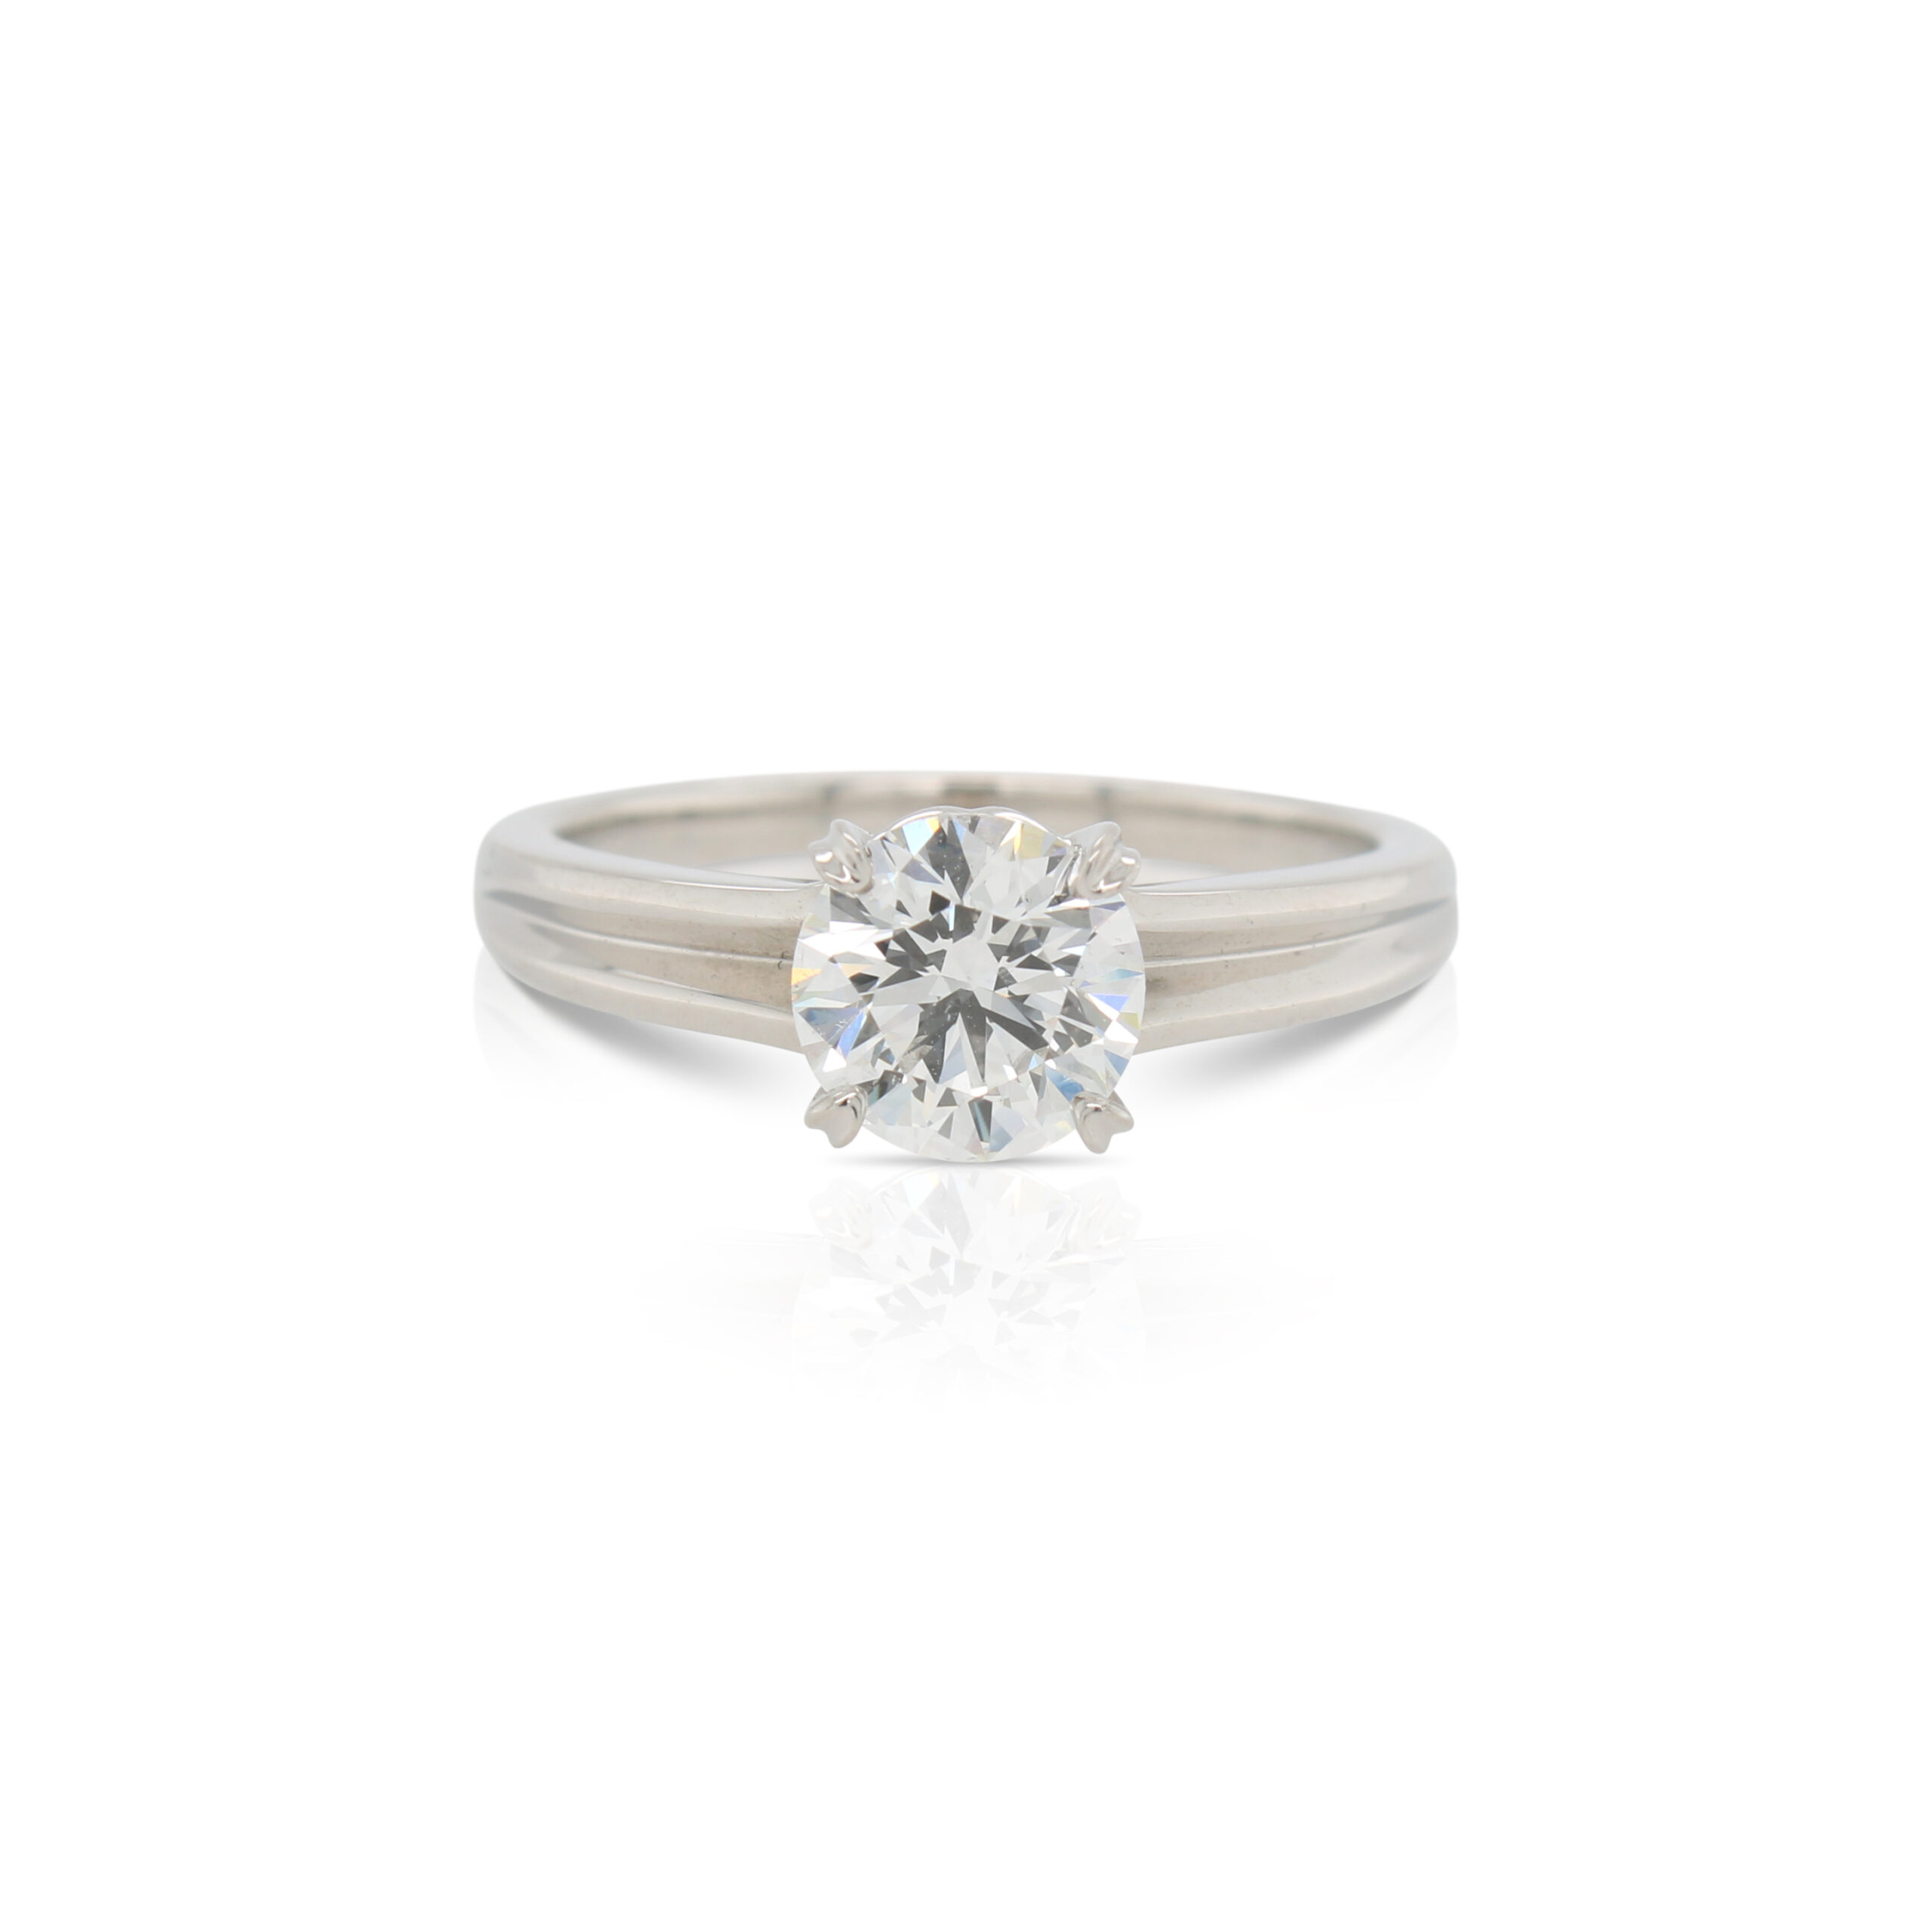 012270Virtue-Solitaire-Engagement-Ring.jpg